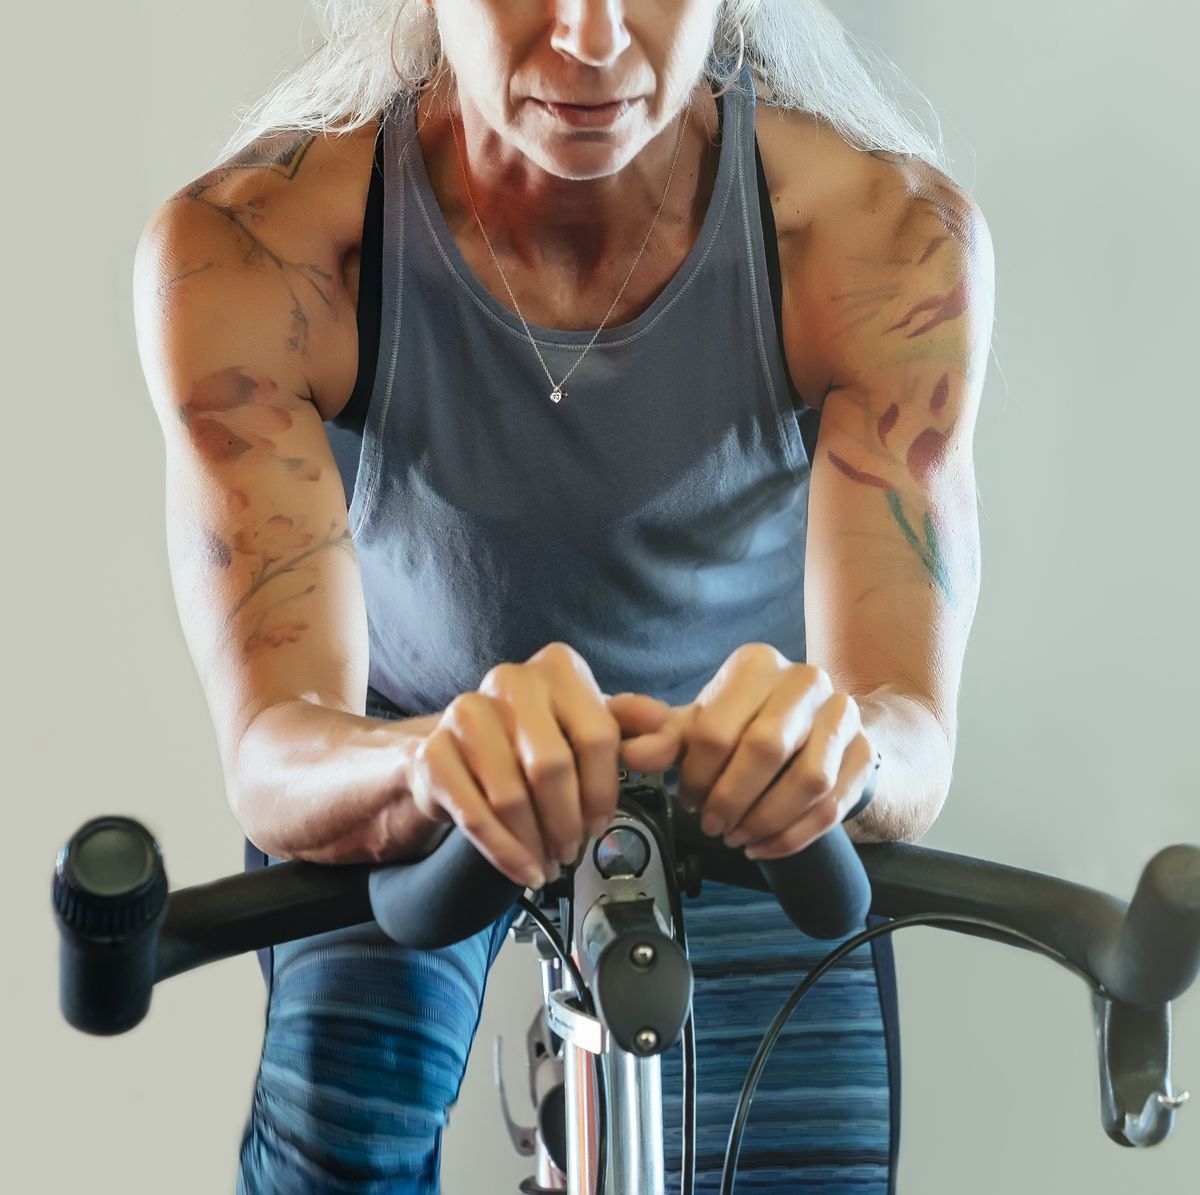 Caucasian woman riding stationary bicycle